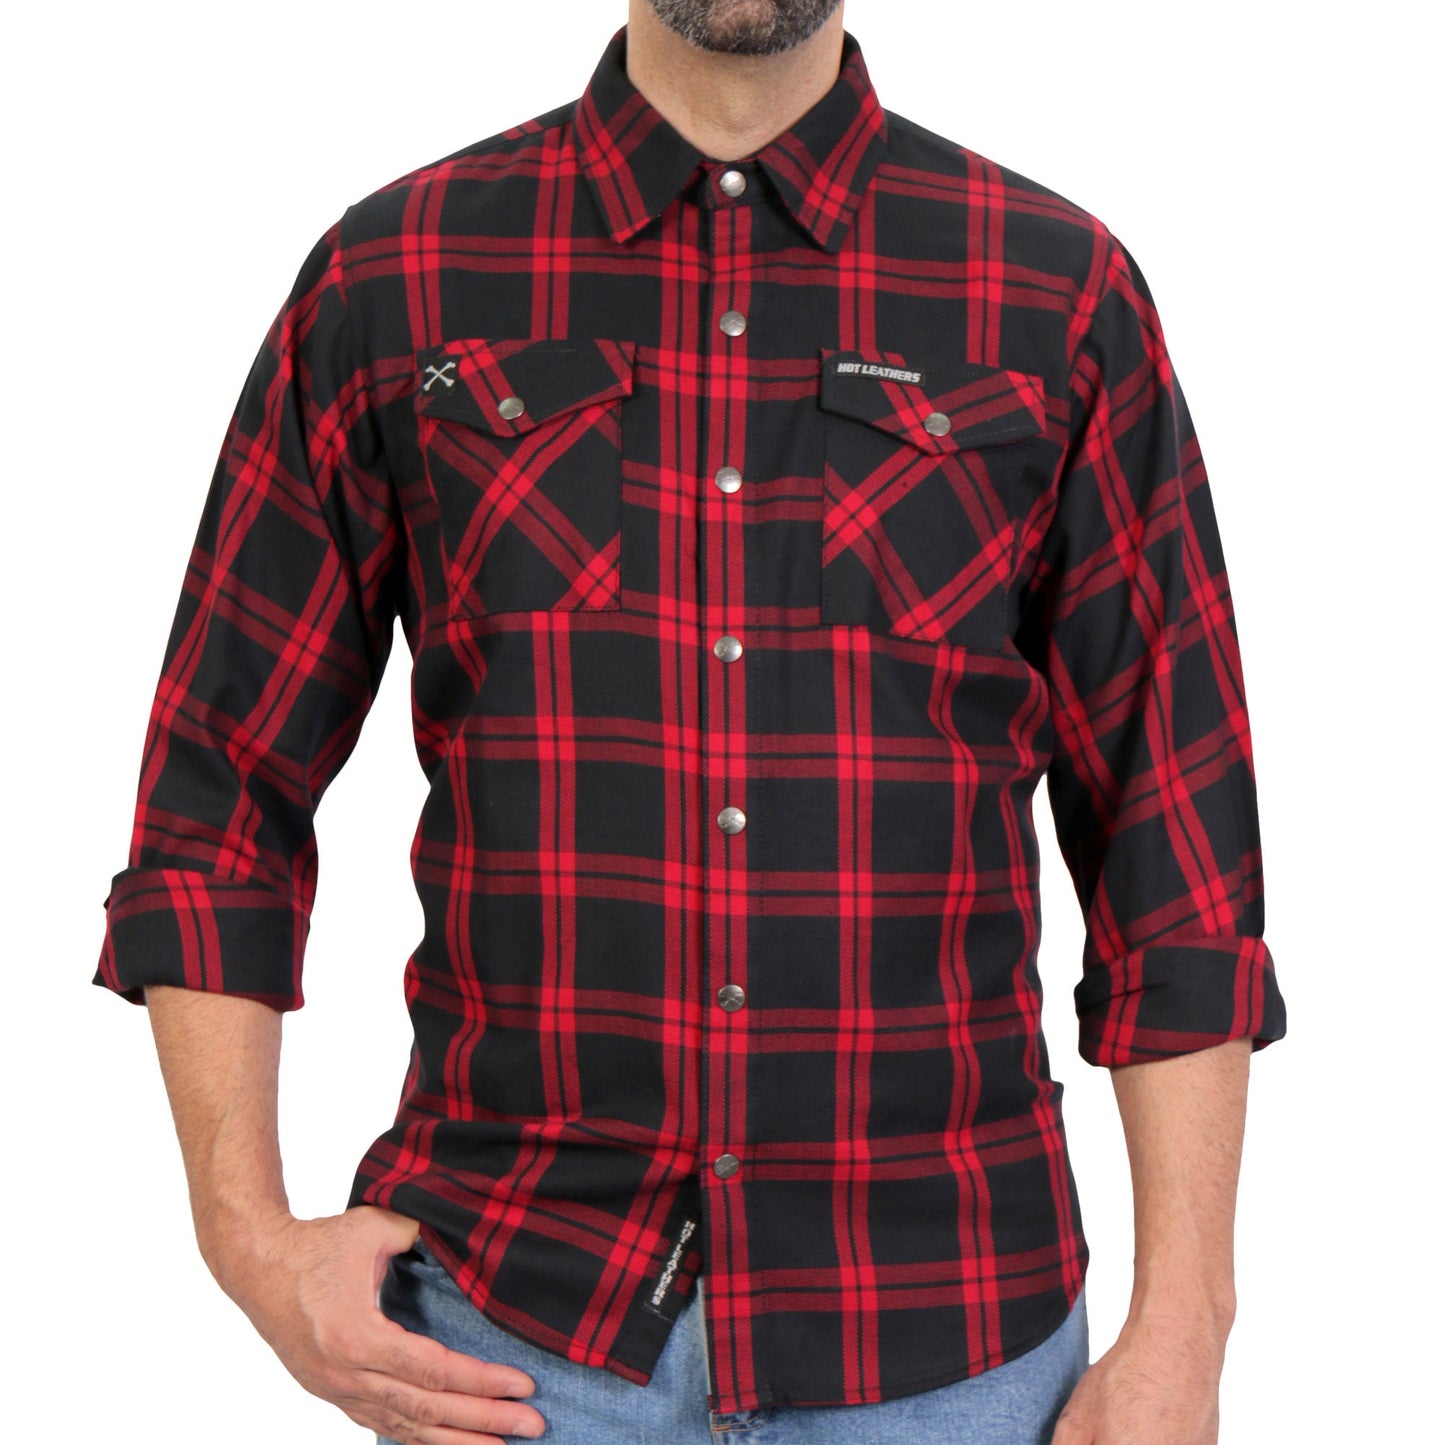 Men's 'Red and Black' Long Sleeve Flannel